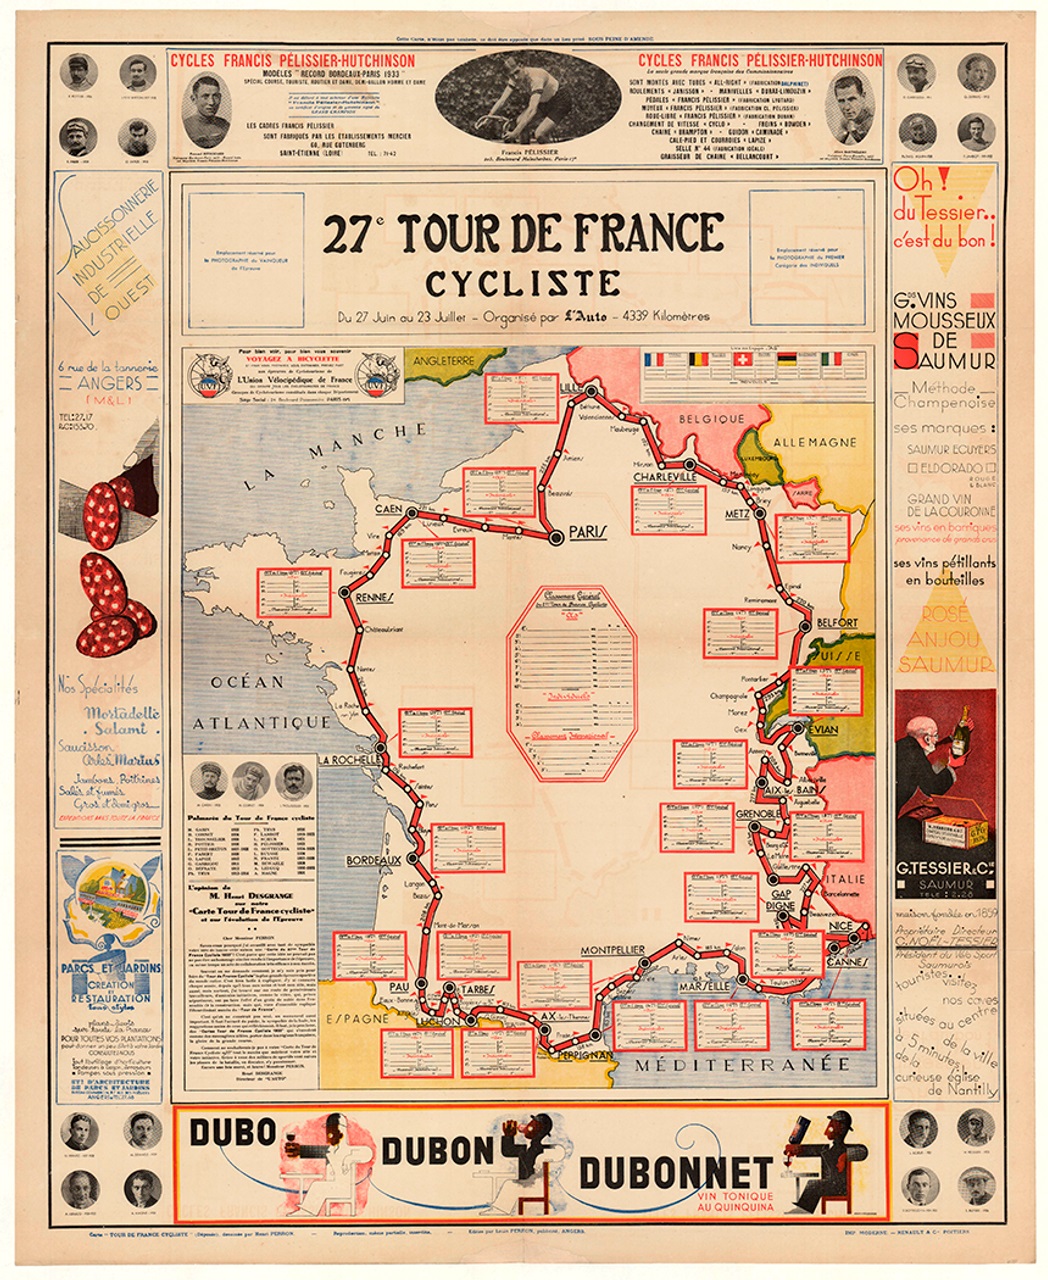 Map of the Tour de France 1933, poster, unknown author, source: vintagebicycleposters.com. In 1933, the Tour de France was won by a racer called Speicher who represented the French national team. The Tour lasted 23 days and was an incredible 4395 kilometres long.